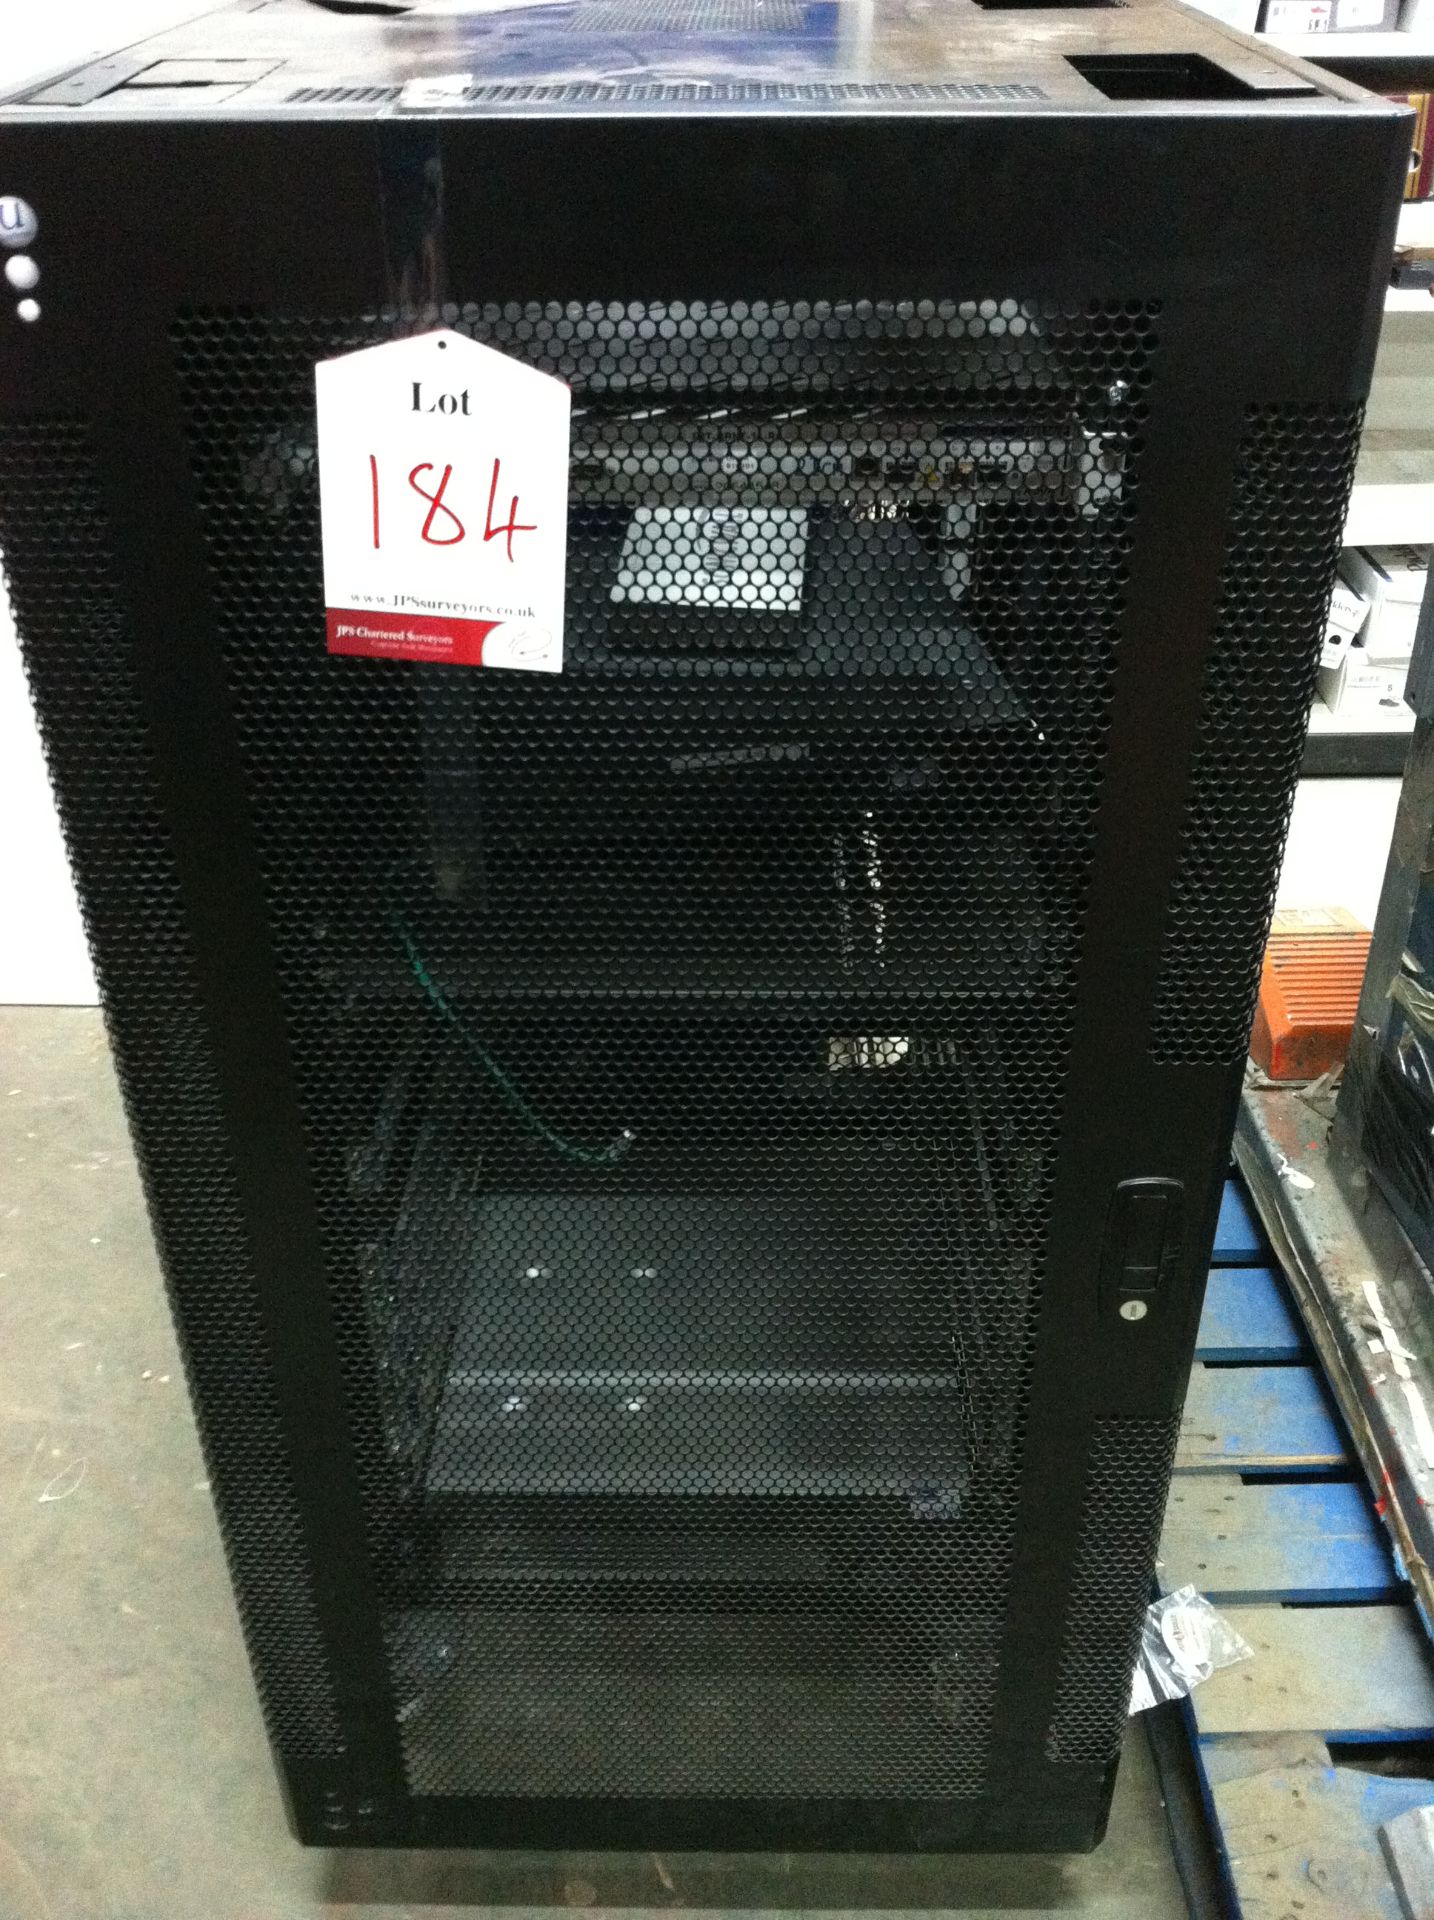 Black Metal Server Cabinet with contents